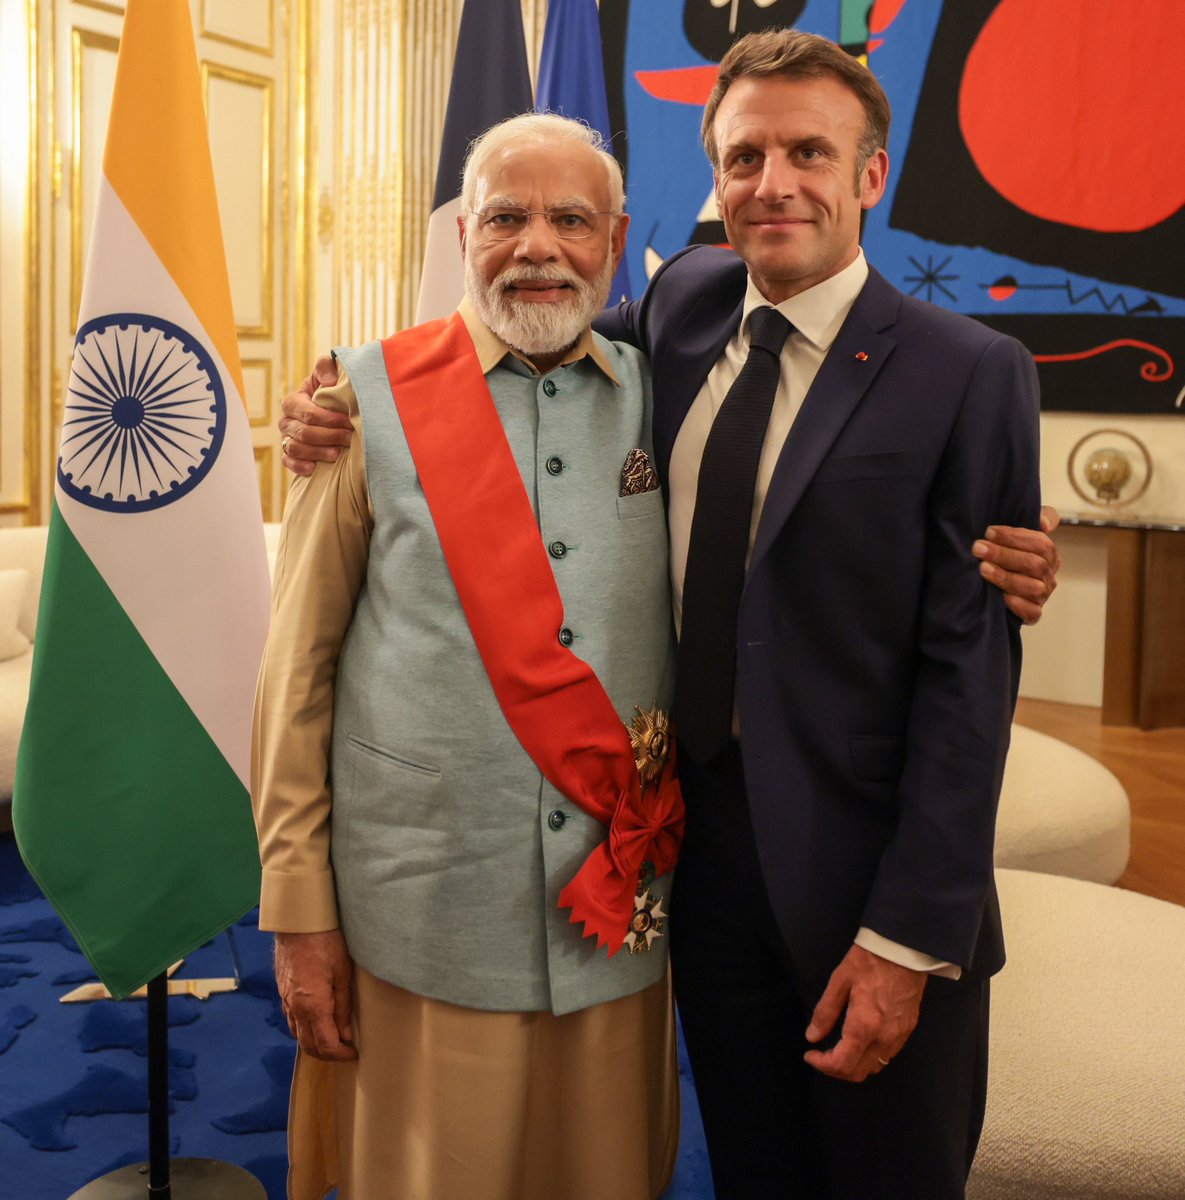 🌟🇮🇳 PM Shri @narendramodi ji receiving the Grand Cross of the Legion of Honour is a crowning achievement, showcasing his extraordinary leadership and fostering enduring friendship between India and France. #Honored #GlobalDiplomacy